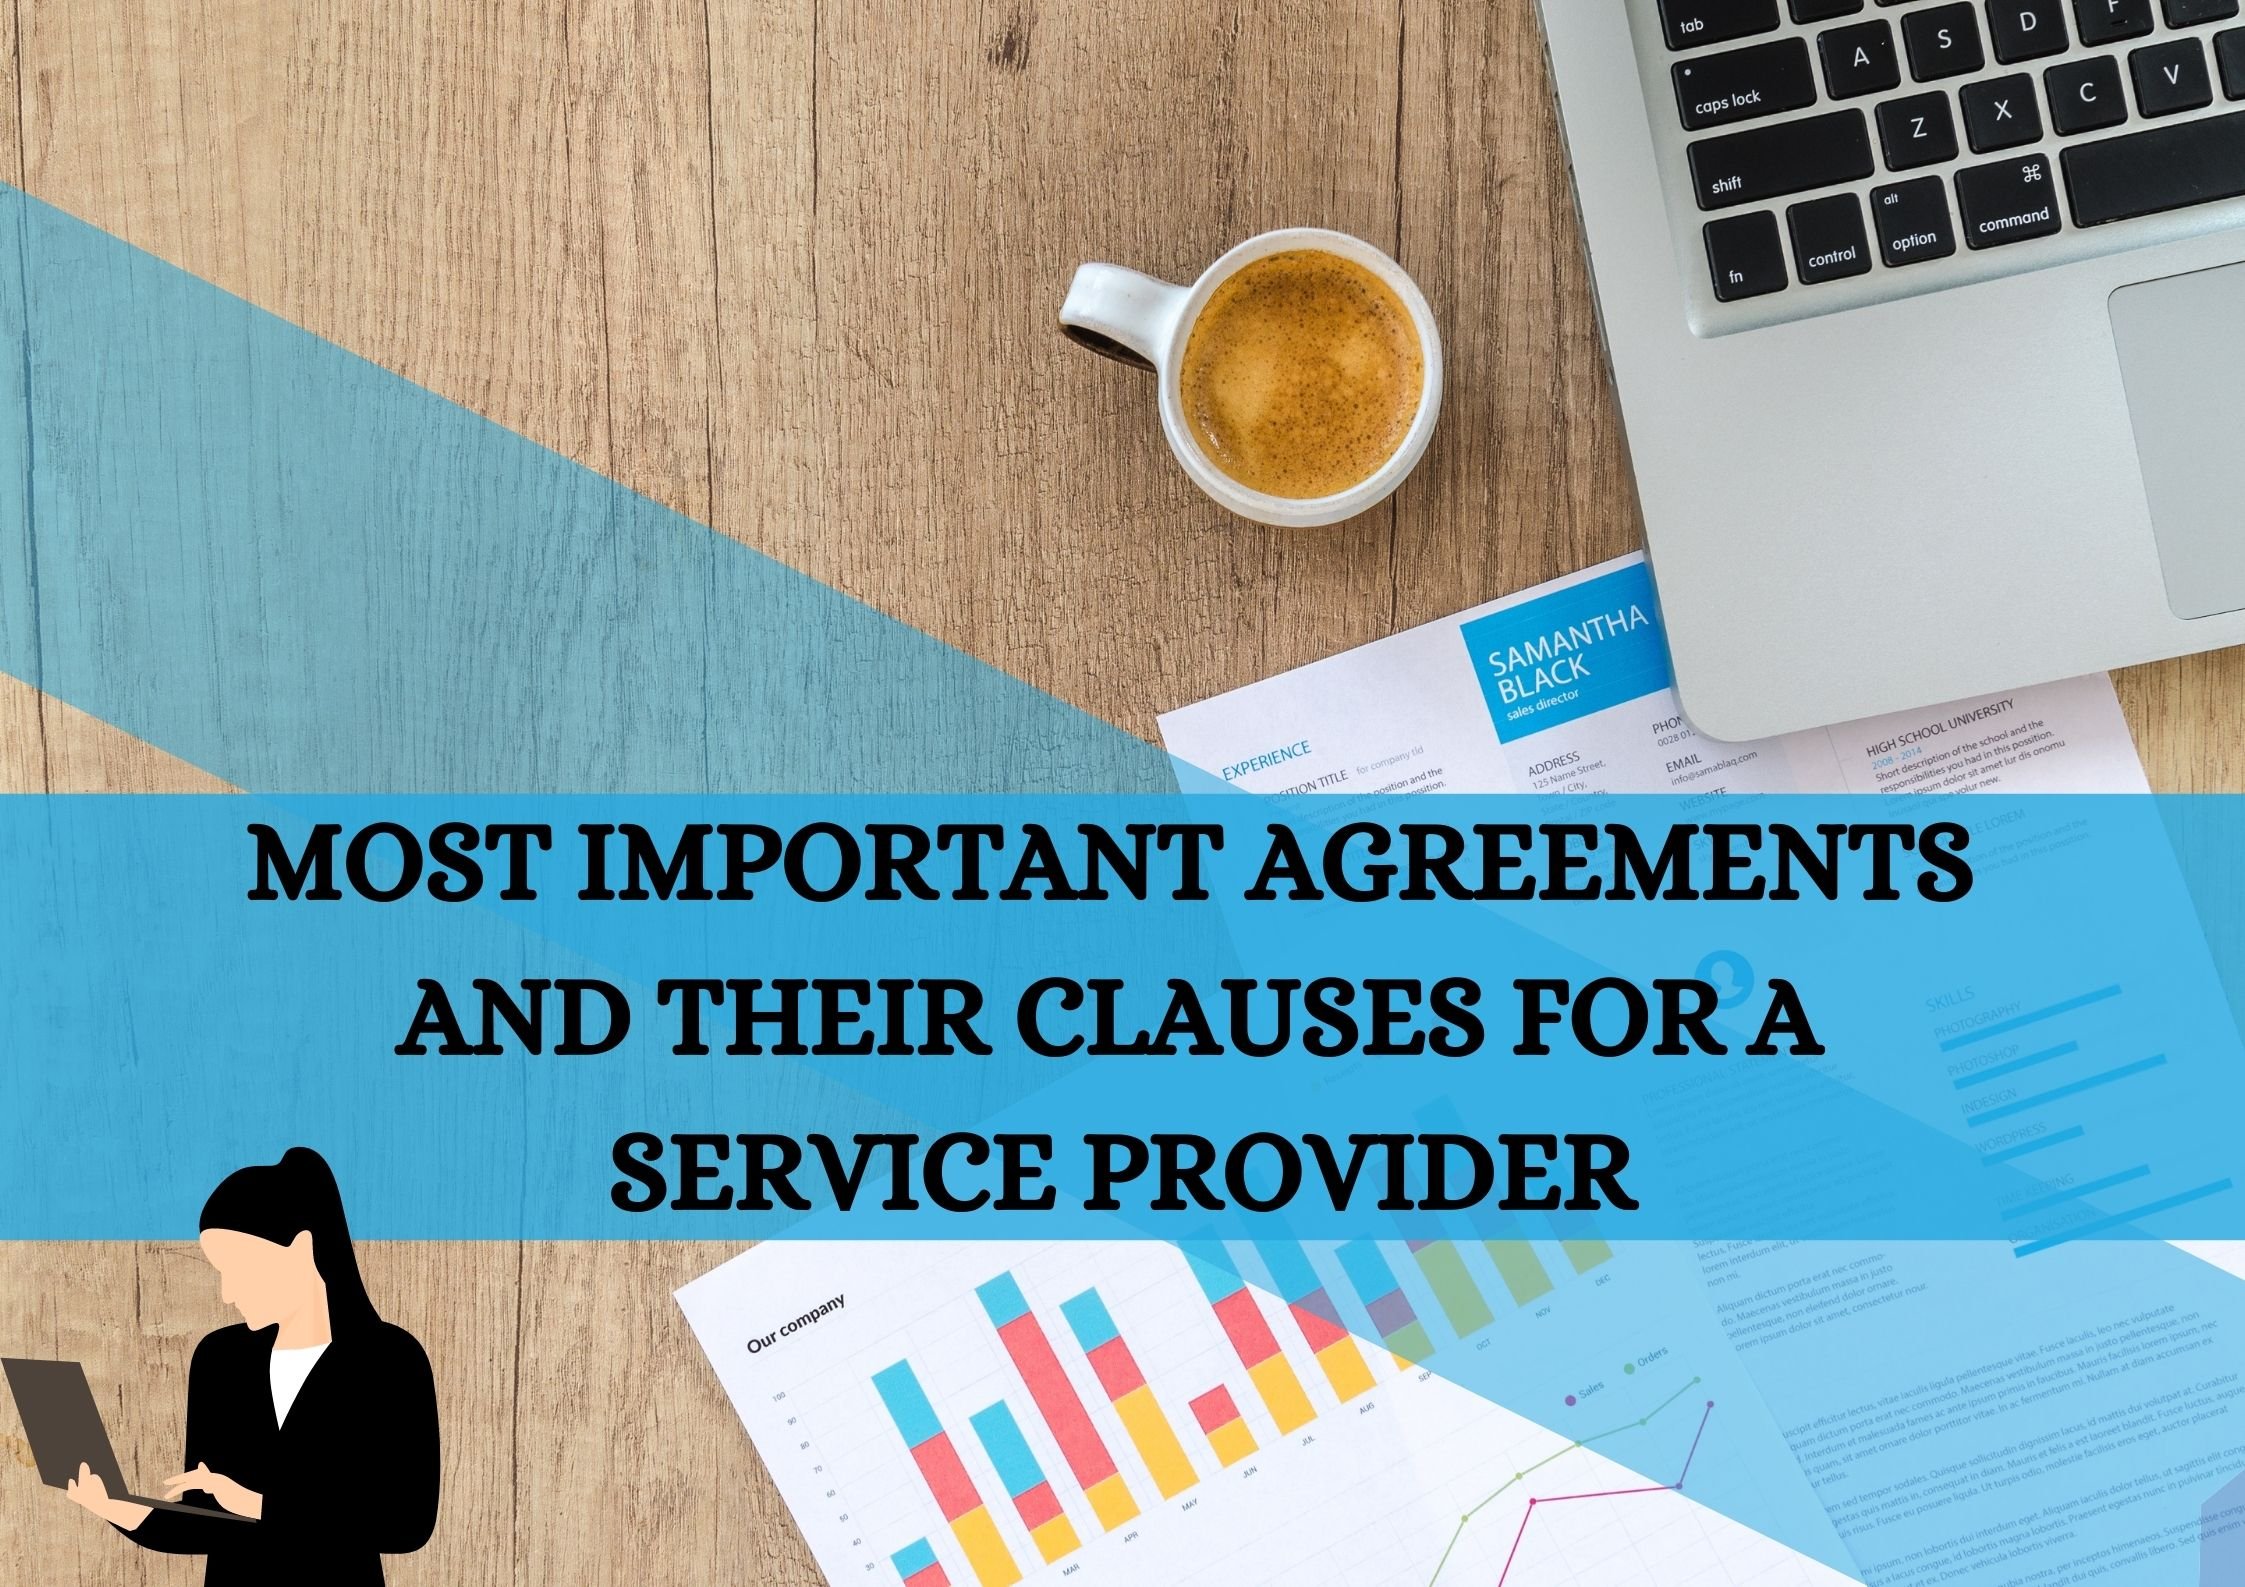 MOST IMPORTANT AGREEMENTS AND THEIR CLAUSES FOR A SERVICE PROVIDER